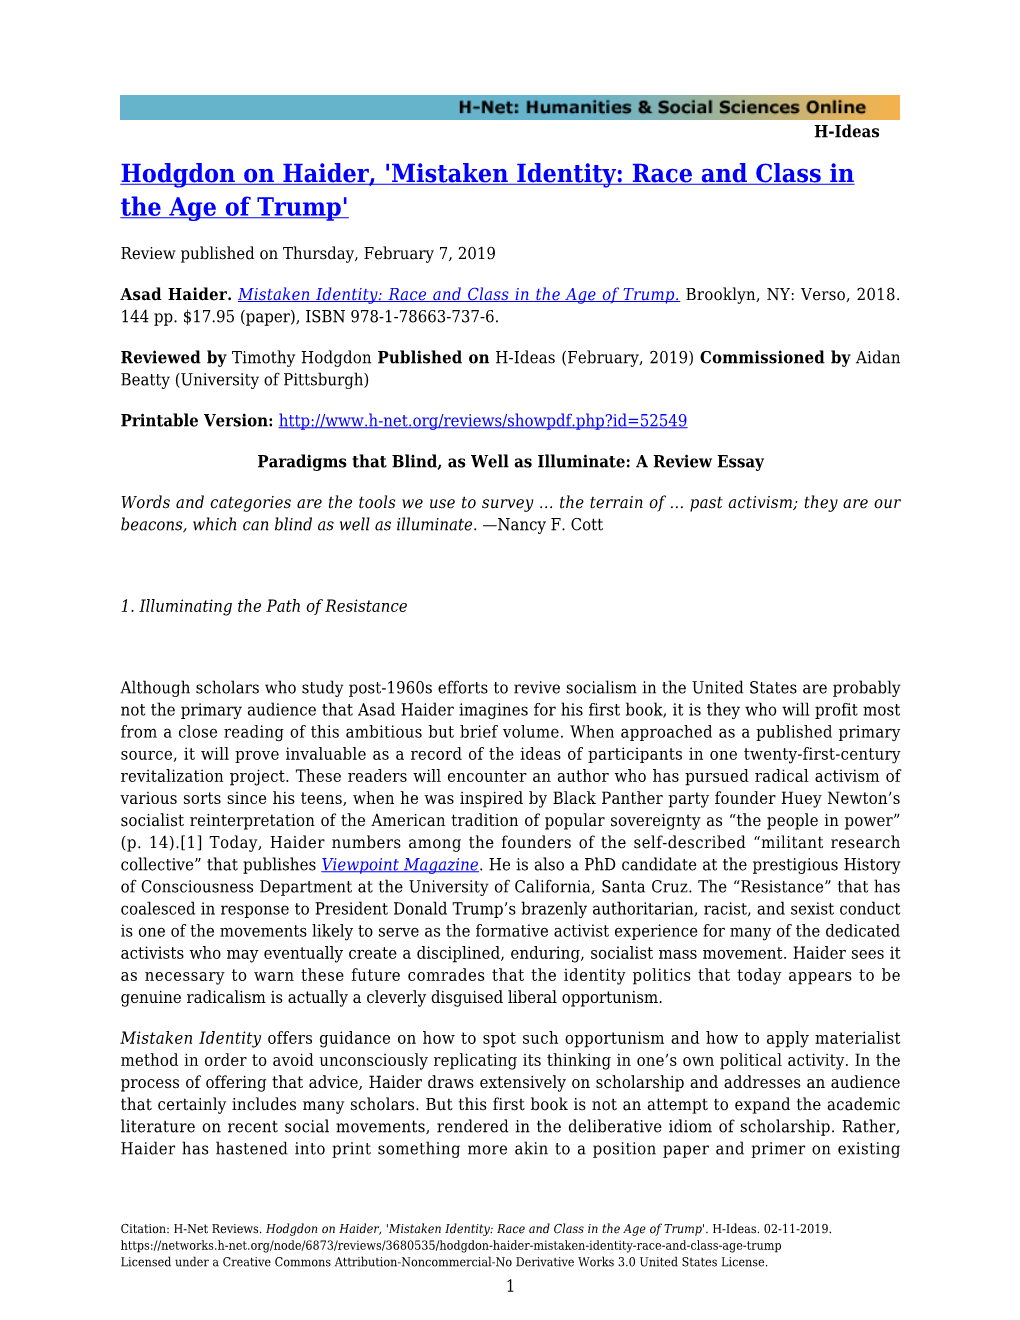 Hodgdon on Haider, 'Mistaken Identity: Race and Class in the Age of Trump'